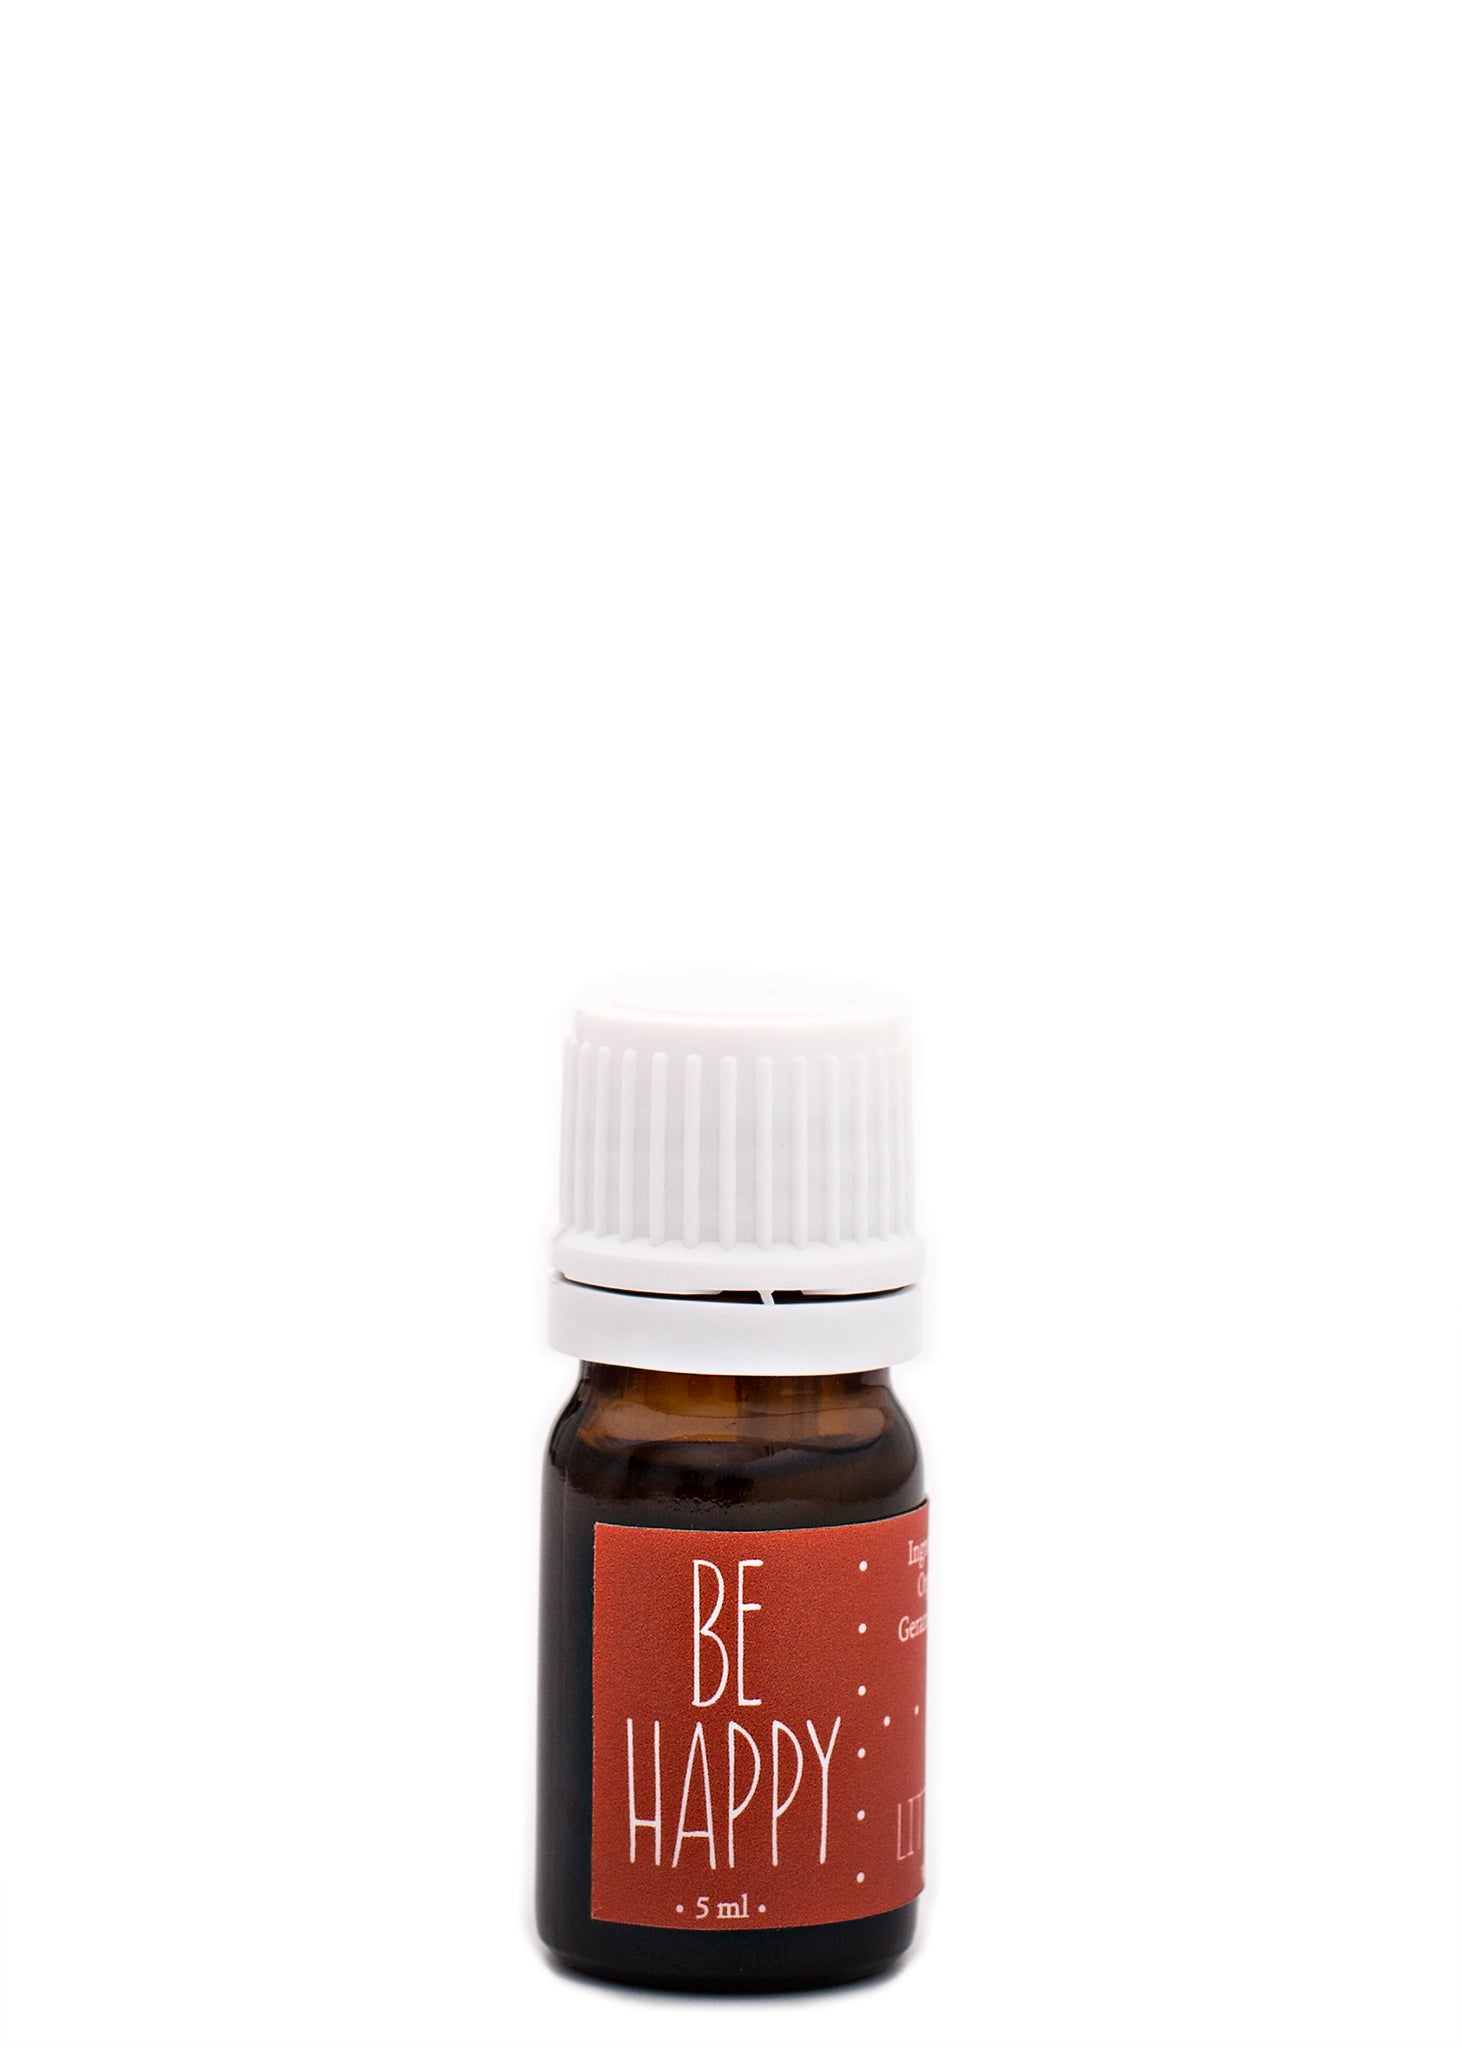 Be Happy organic Essential Oil Blend